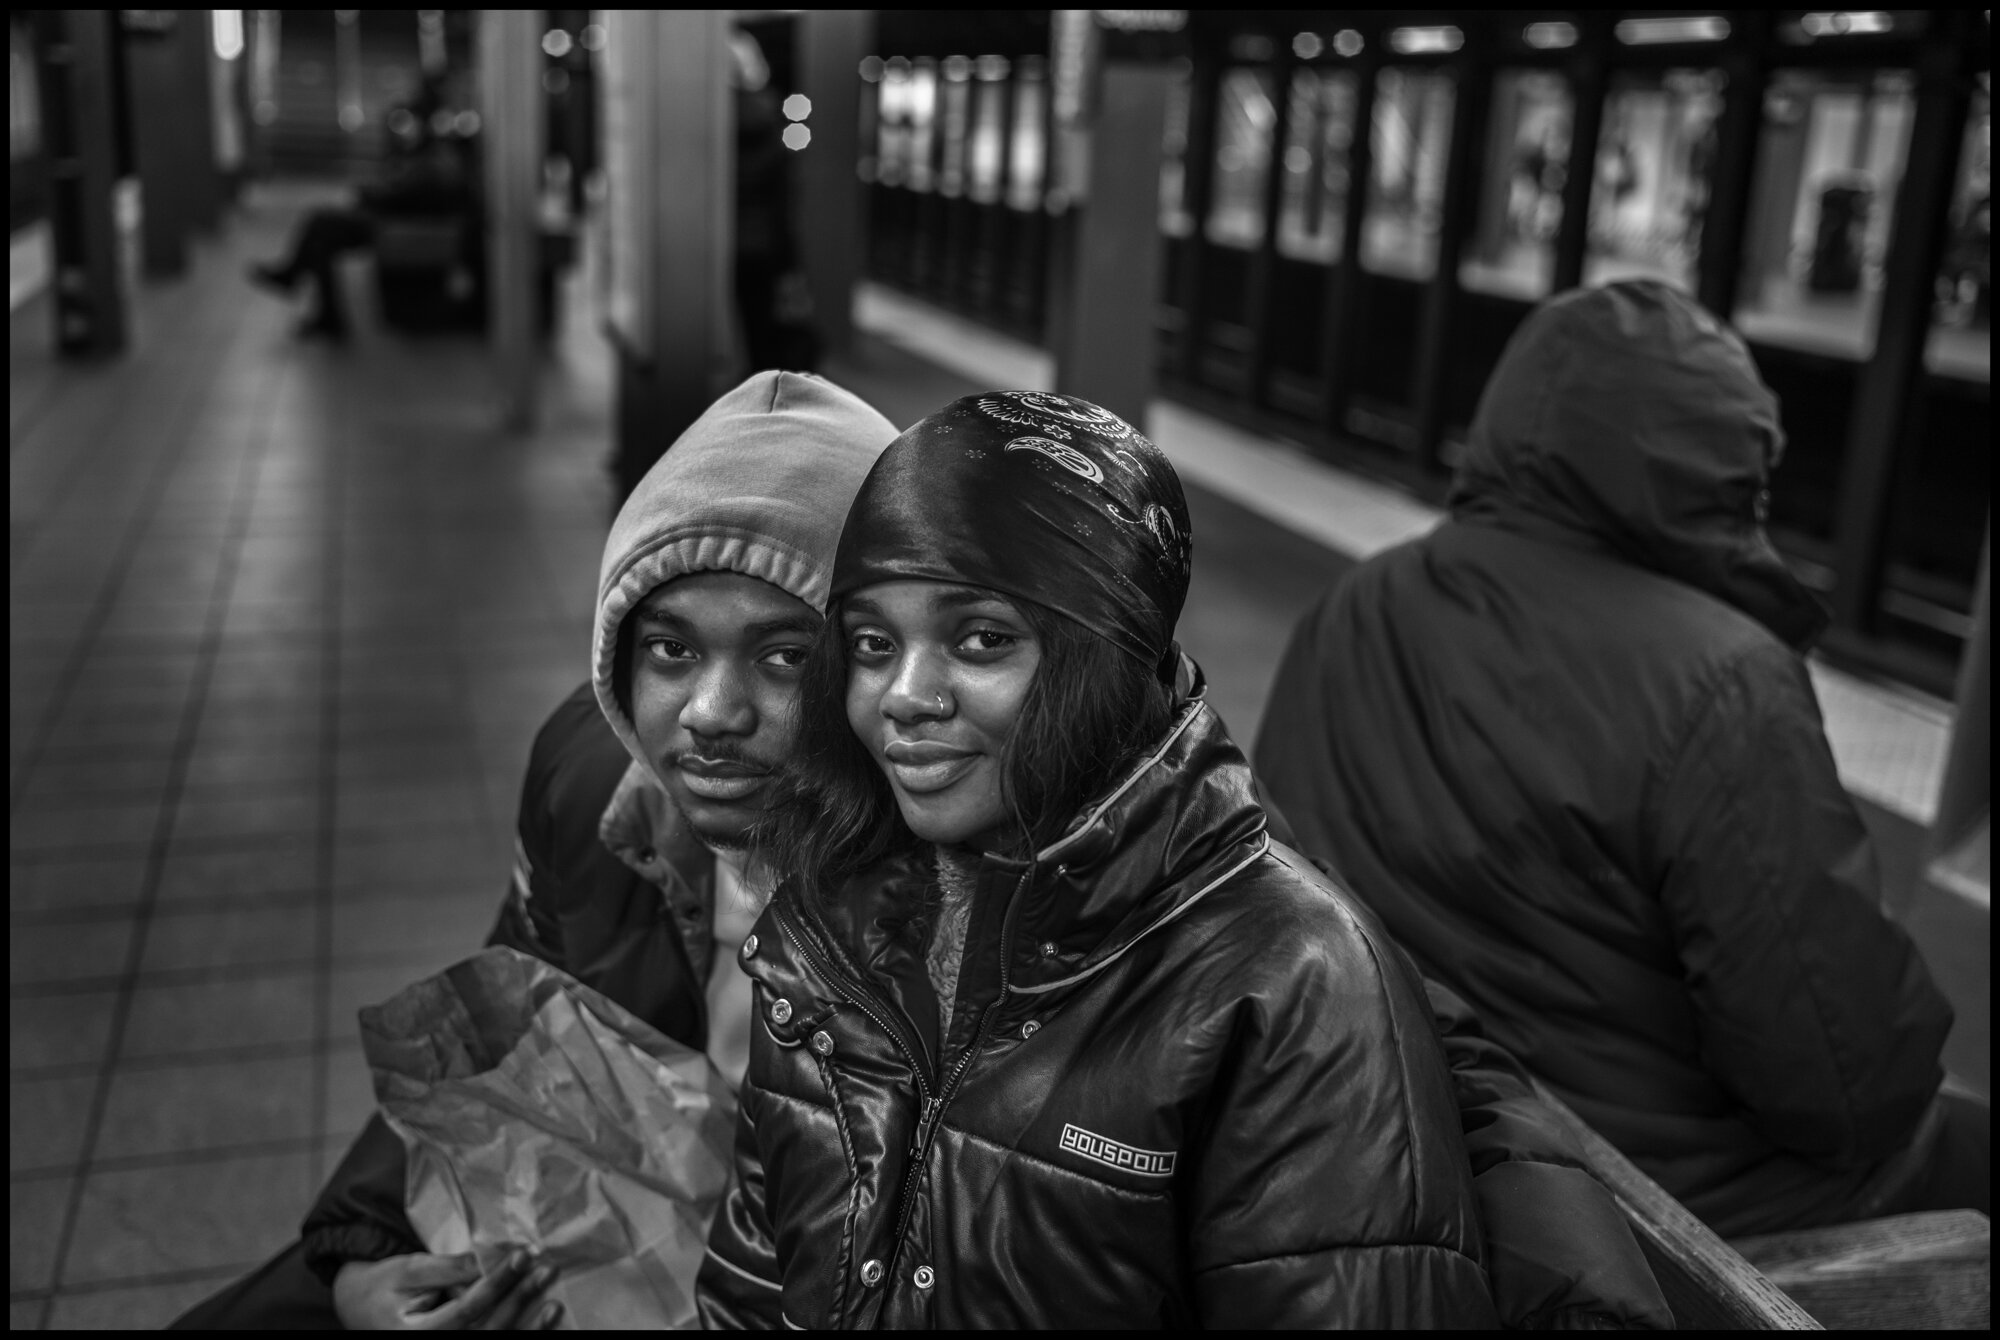  When I arrived at the Times Square stop to change trains to head up town, a young couple, Stephon, 24, and Fidaus,21 and originally from Ghana, were sitting close together on a bench waiting or the train. I asked them if they were a couple and they 